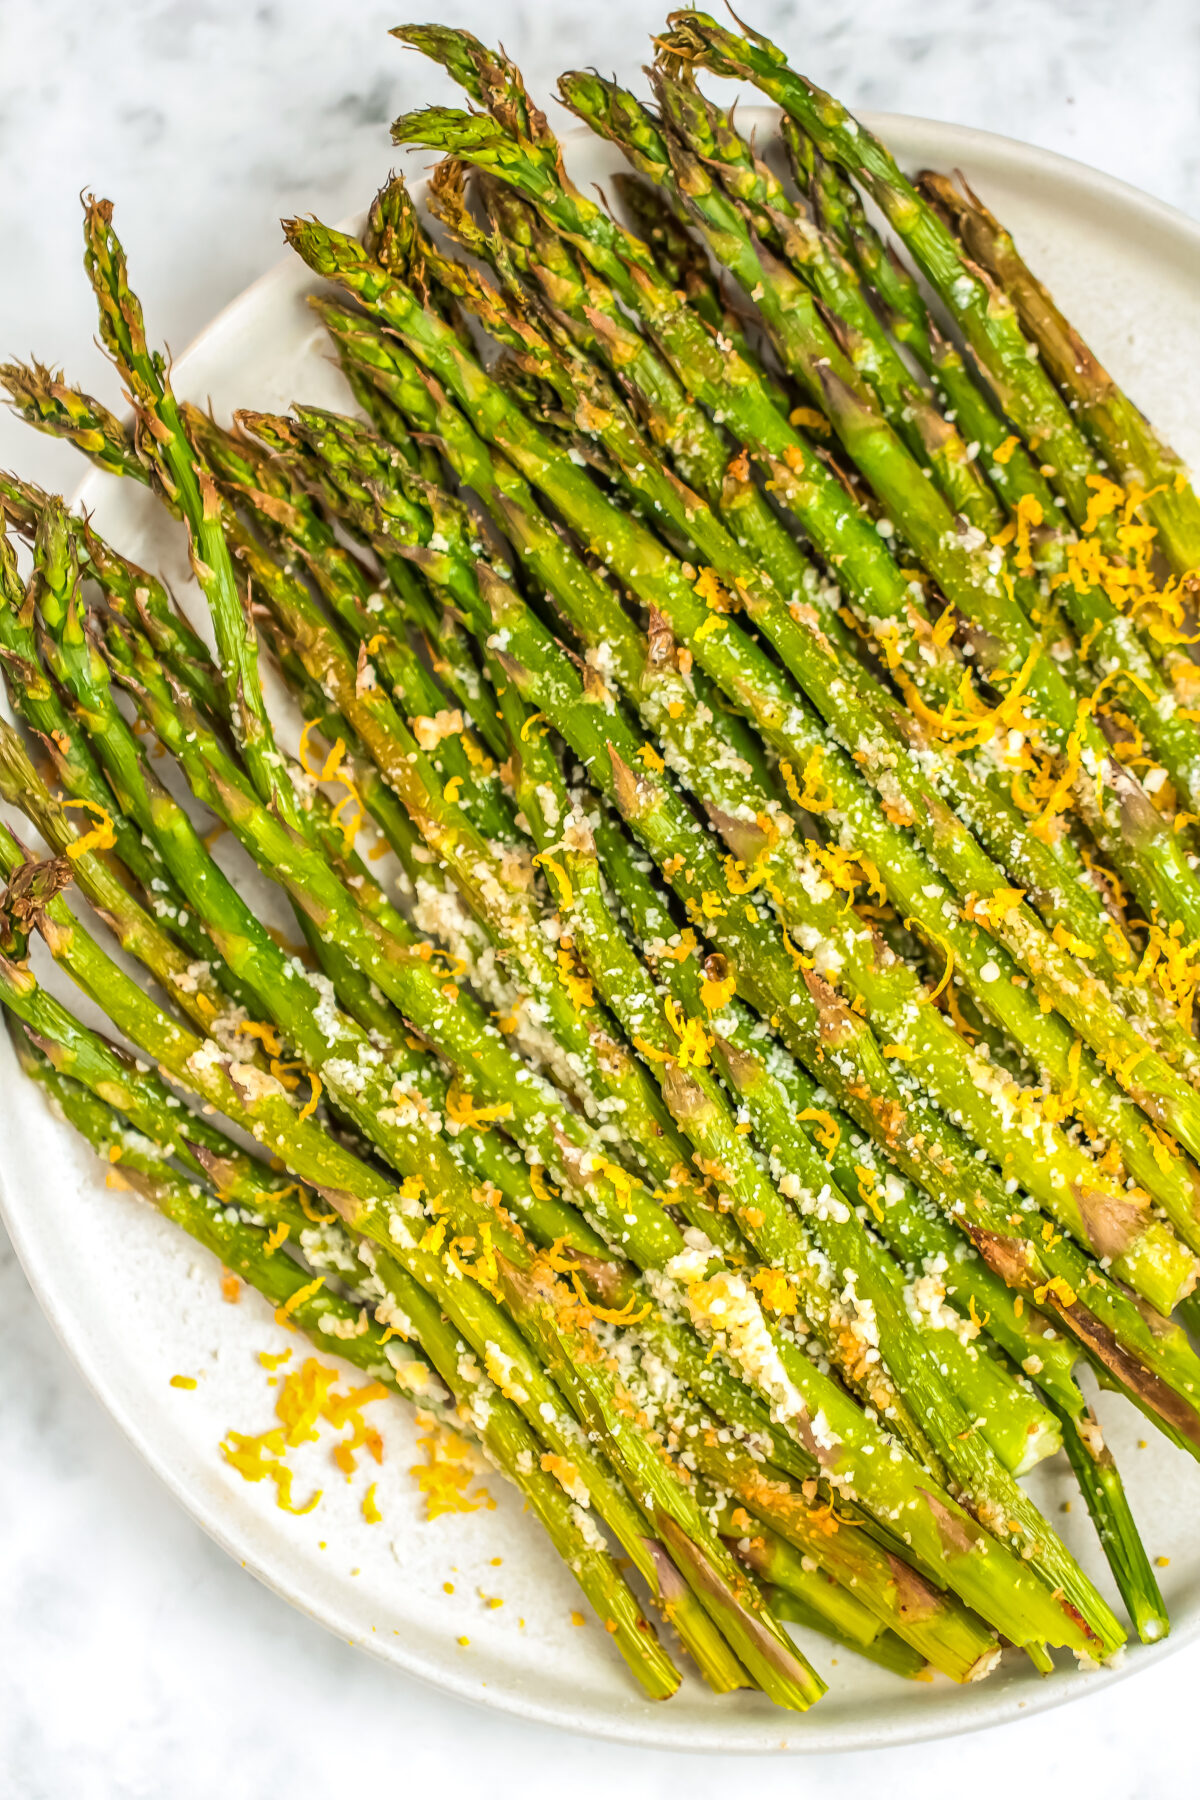 Looking for a delicious way to enjoy asparagus? Our air fryer roasted asparagus recipe is simple, healthy, and absolutely the best side dish!